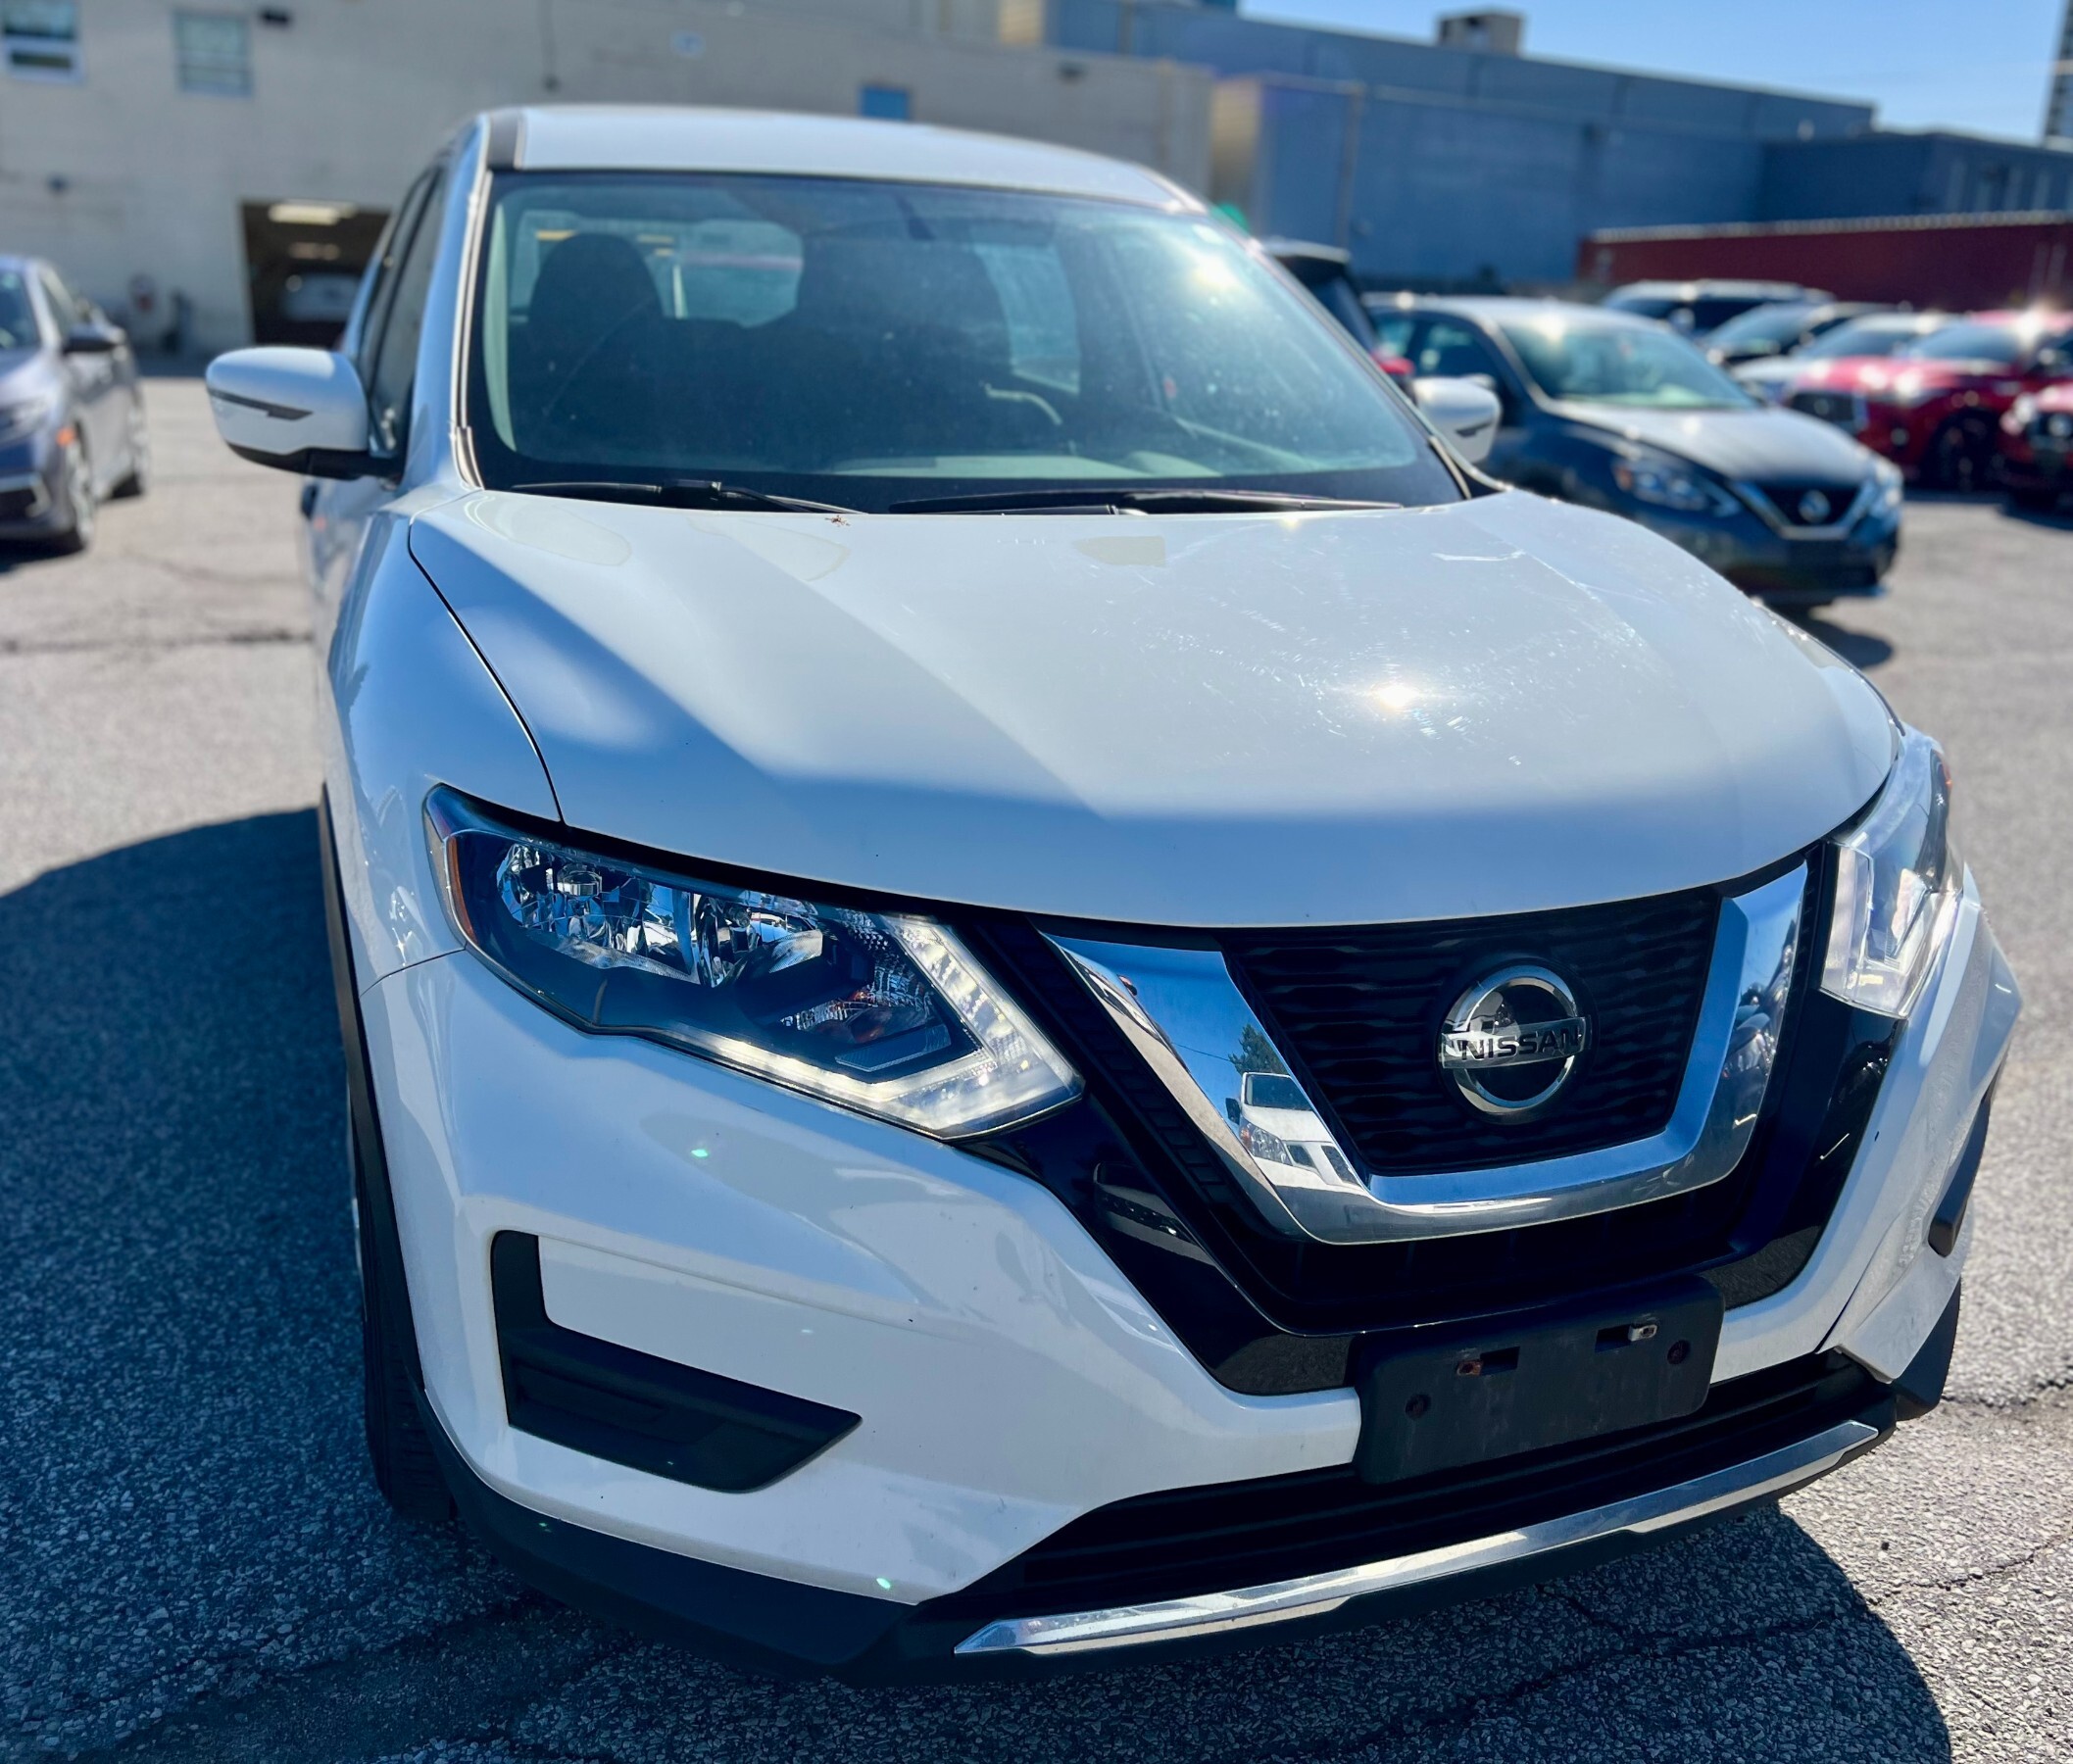 2019 Nissan Rogue S - SALE EVENT MAY 24- MAY 25